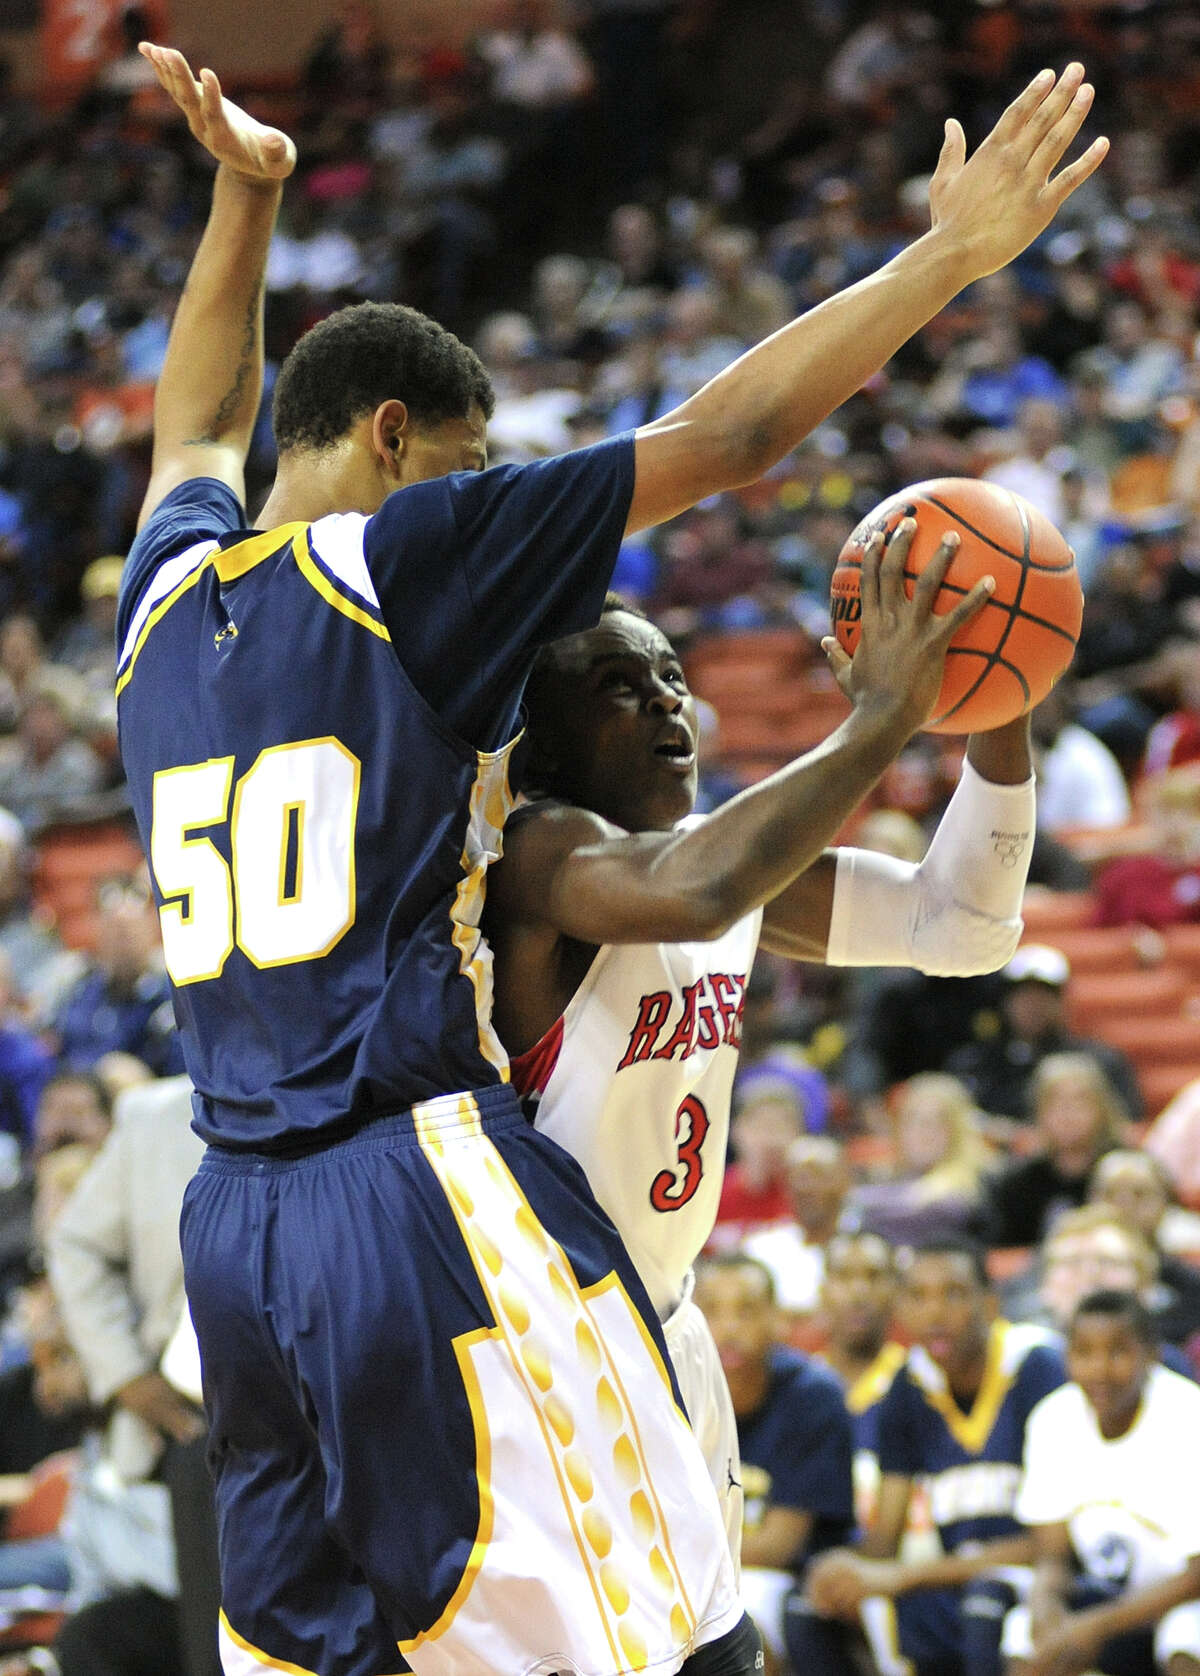 Terry advances to boys 4A state championship game